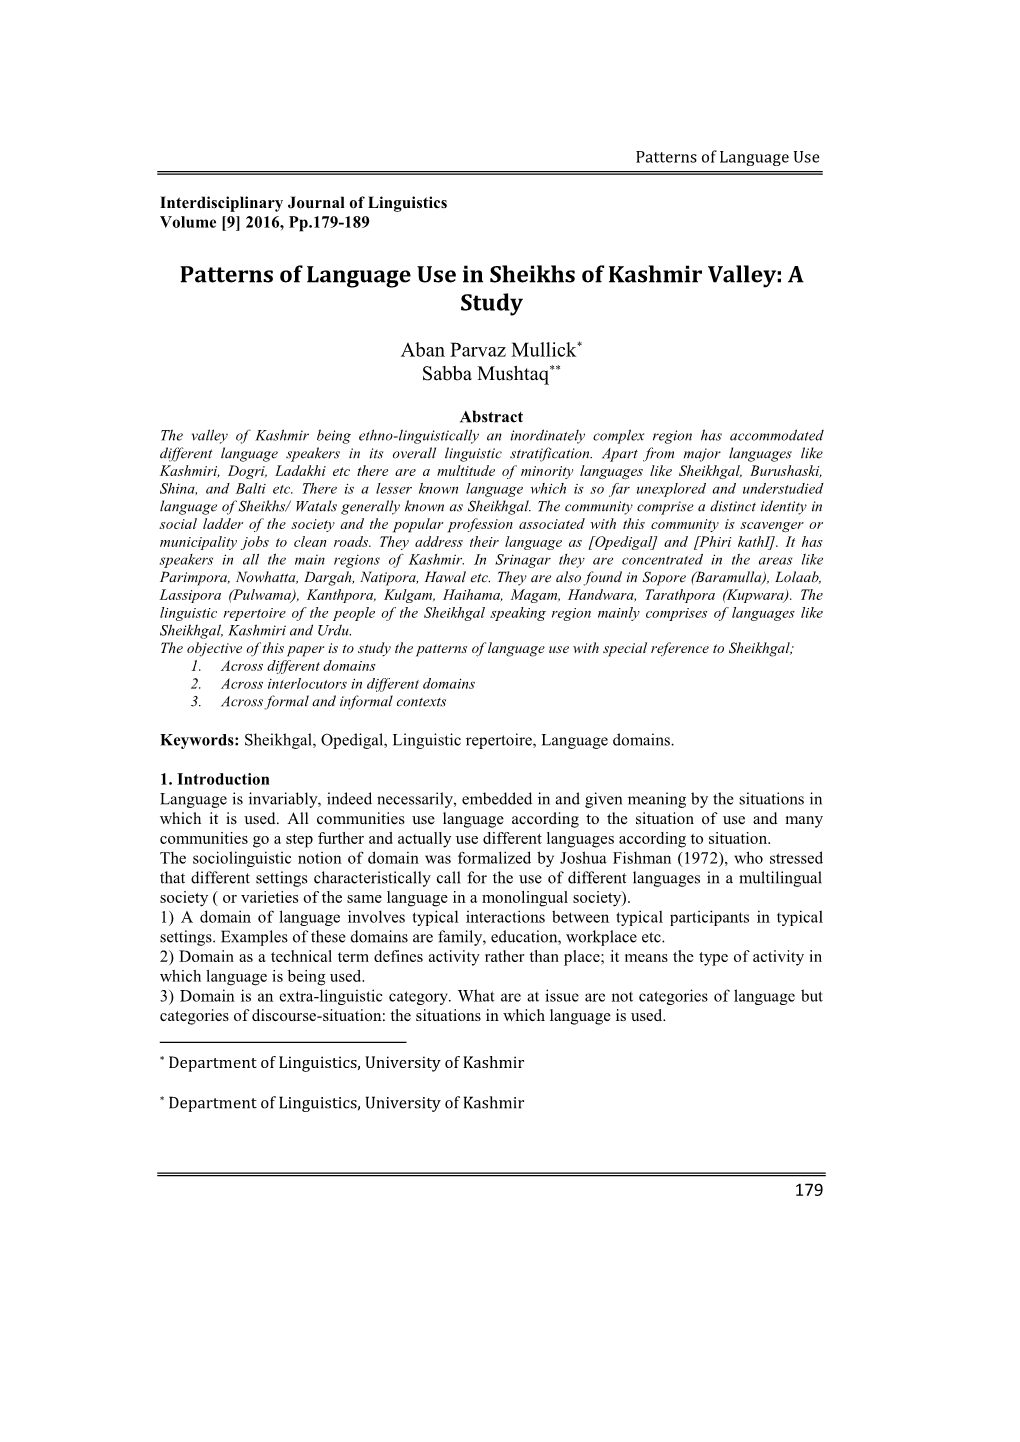 Patterns of Language Use in Sheikhs of Kashmir Valley: a Study